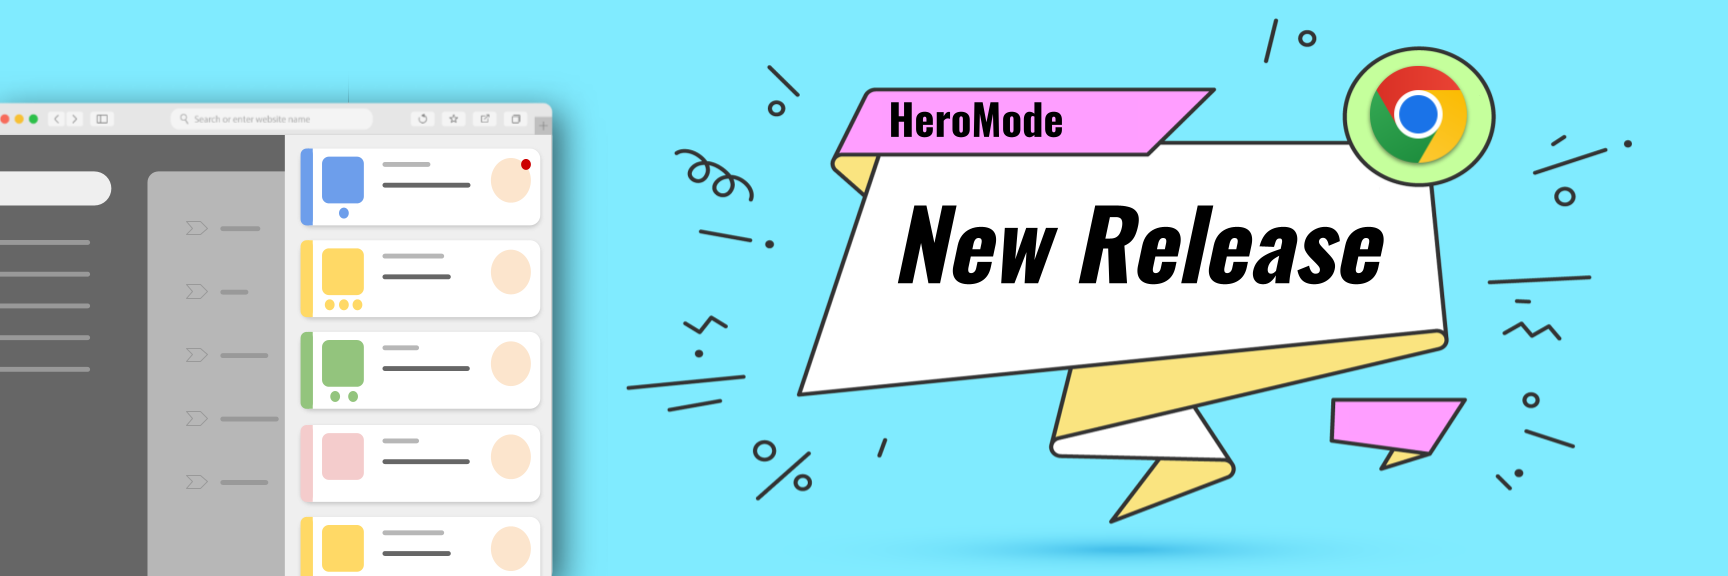 HeroMode v3 is now released as a web app!